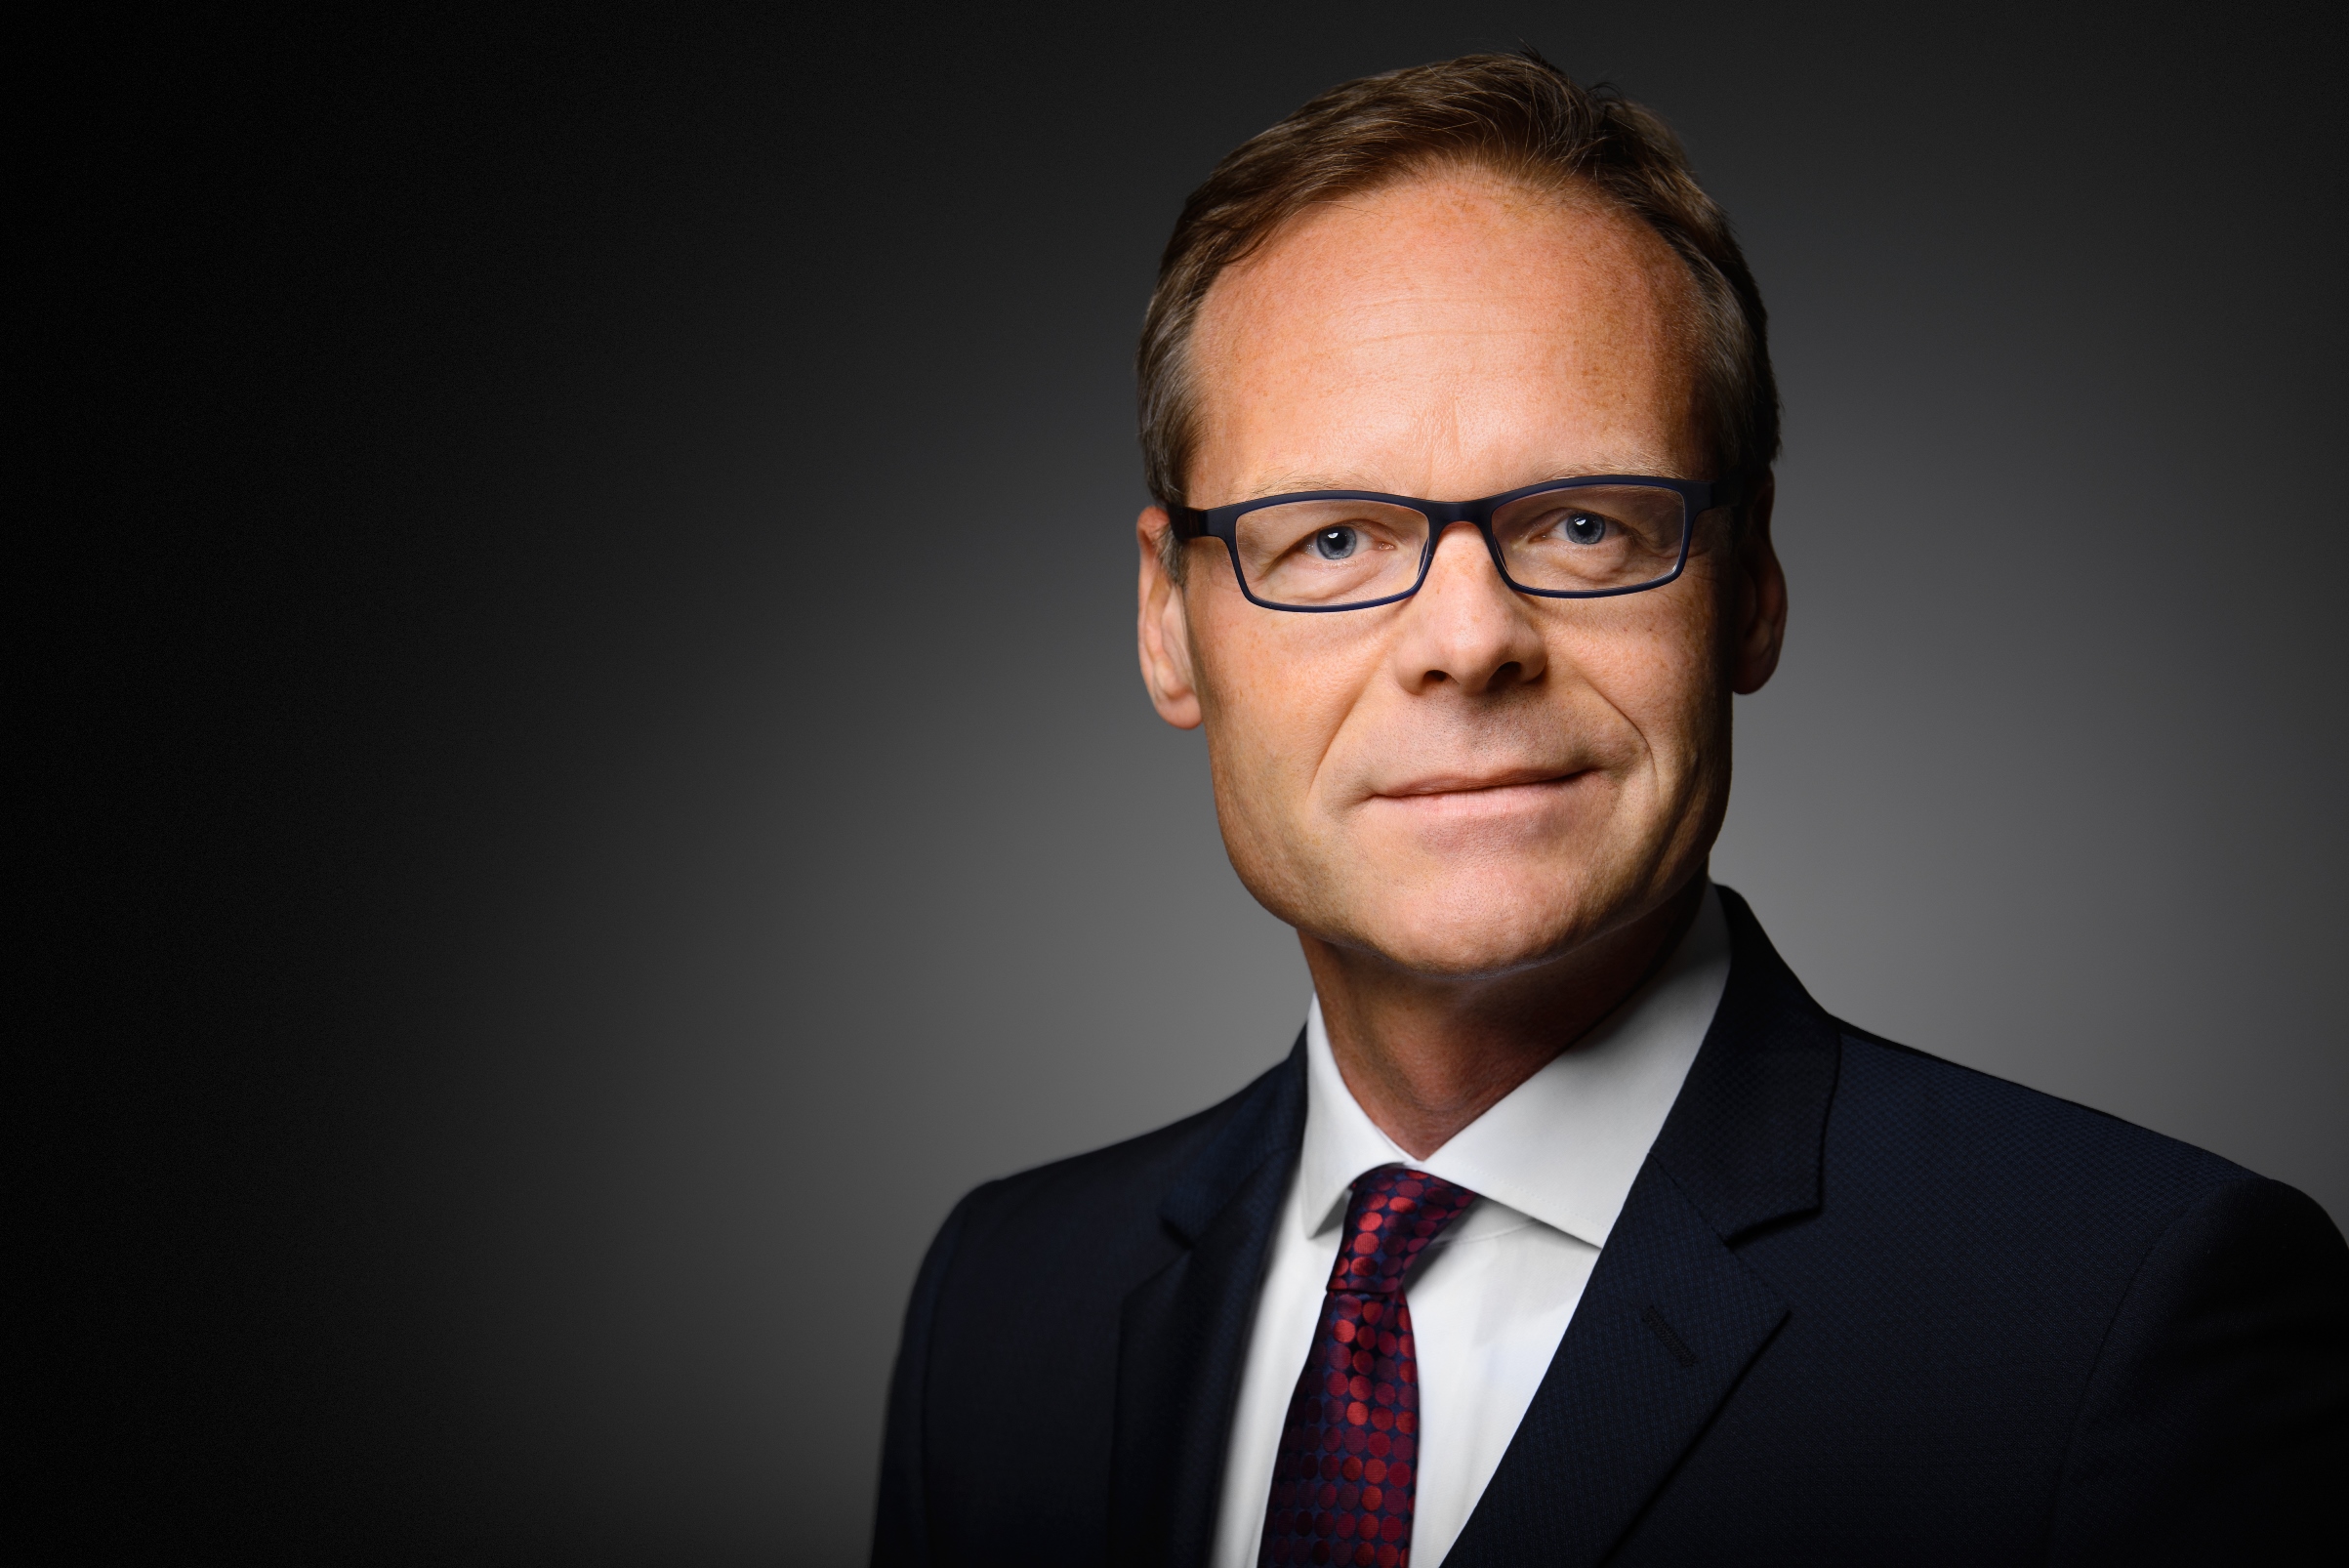 Mirko Pahl was appointed new CEO of TX Logistik